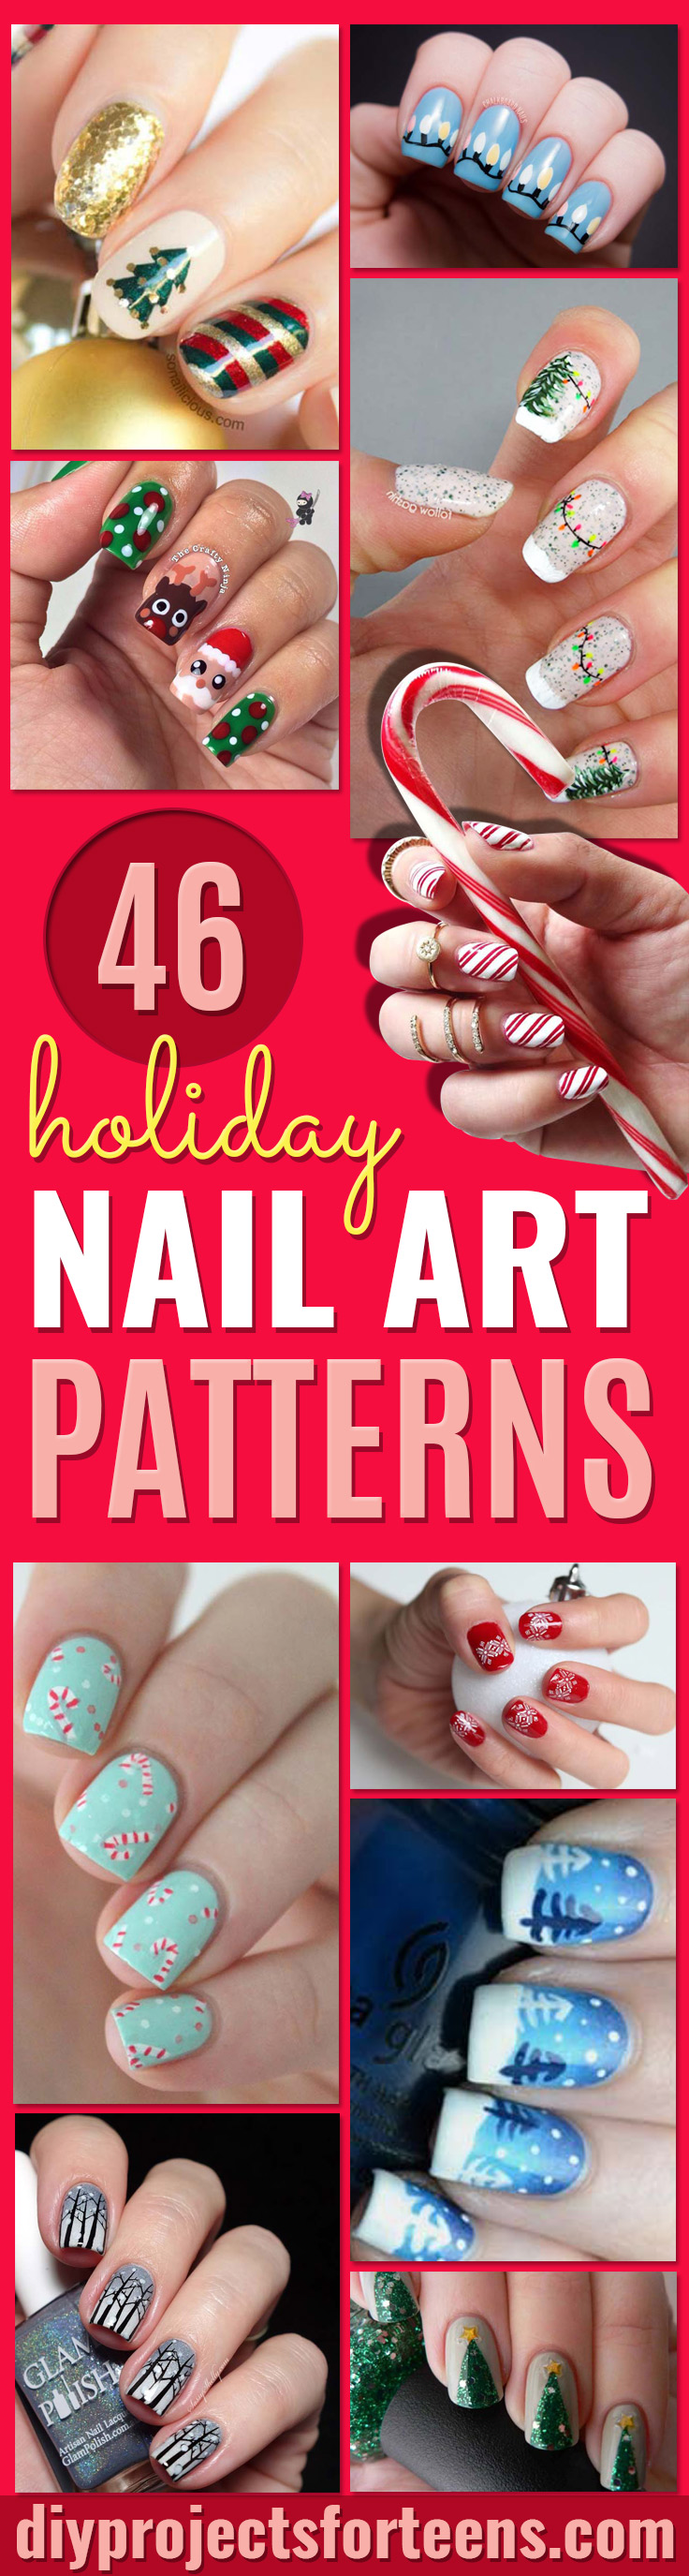 Cool DIY Nail Art Designs and Patterns for Christmas and Holidays -Do It Yourself Manicure Ideas With Christmas Trees, Candy Canes, Snowflakes and Glittery Designs for Holiday Nails - Step by Step Tutorials and Instructions http://diyprojectsforteens.com/holiday-nail-art-patterns/